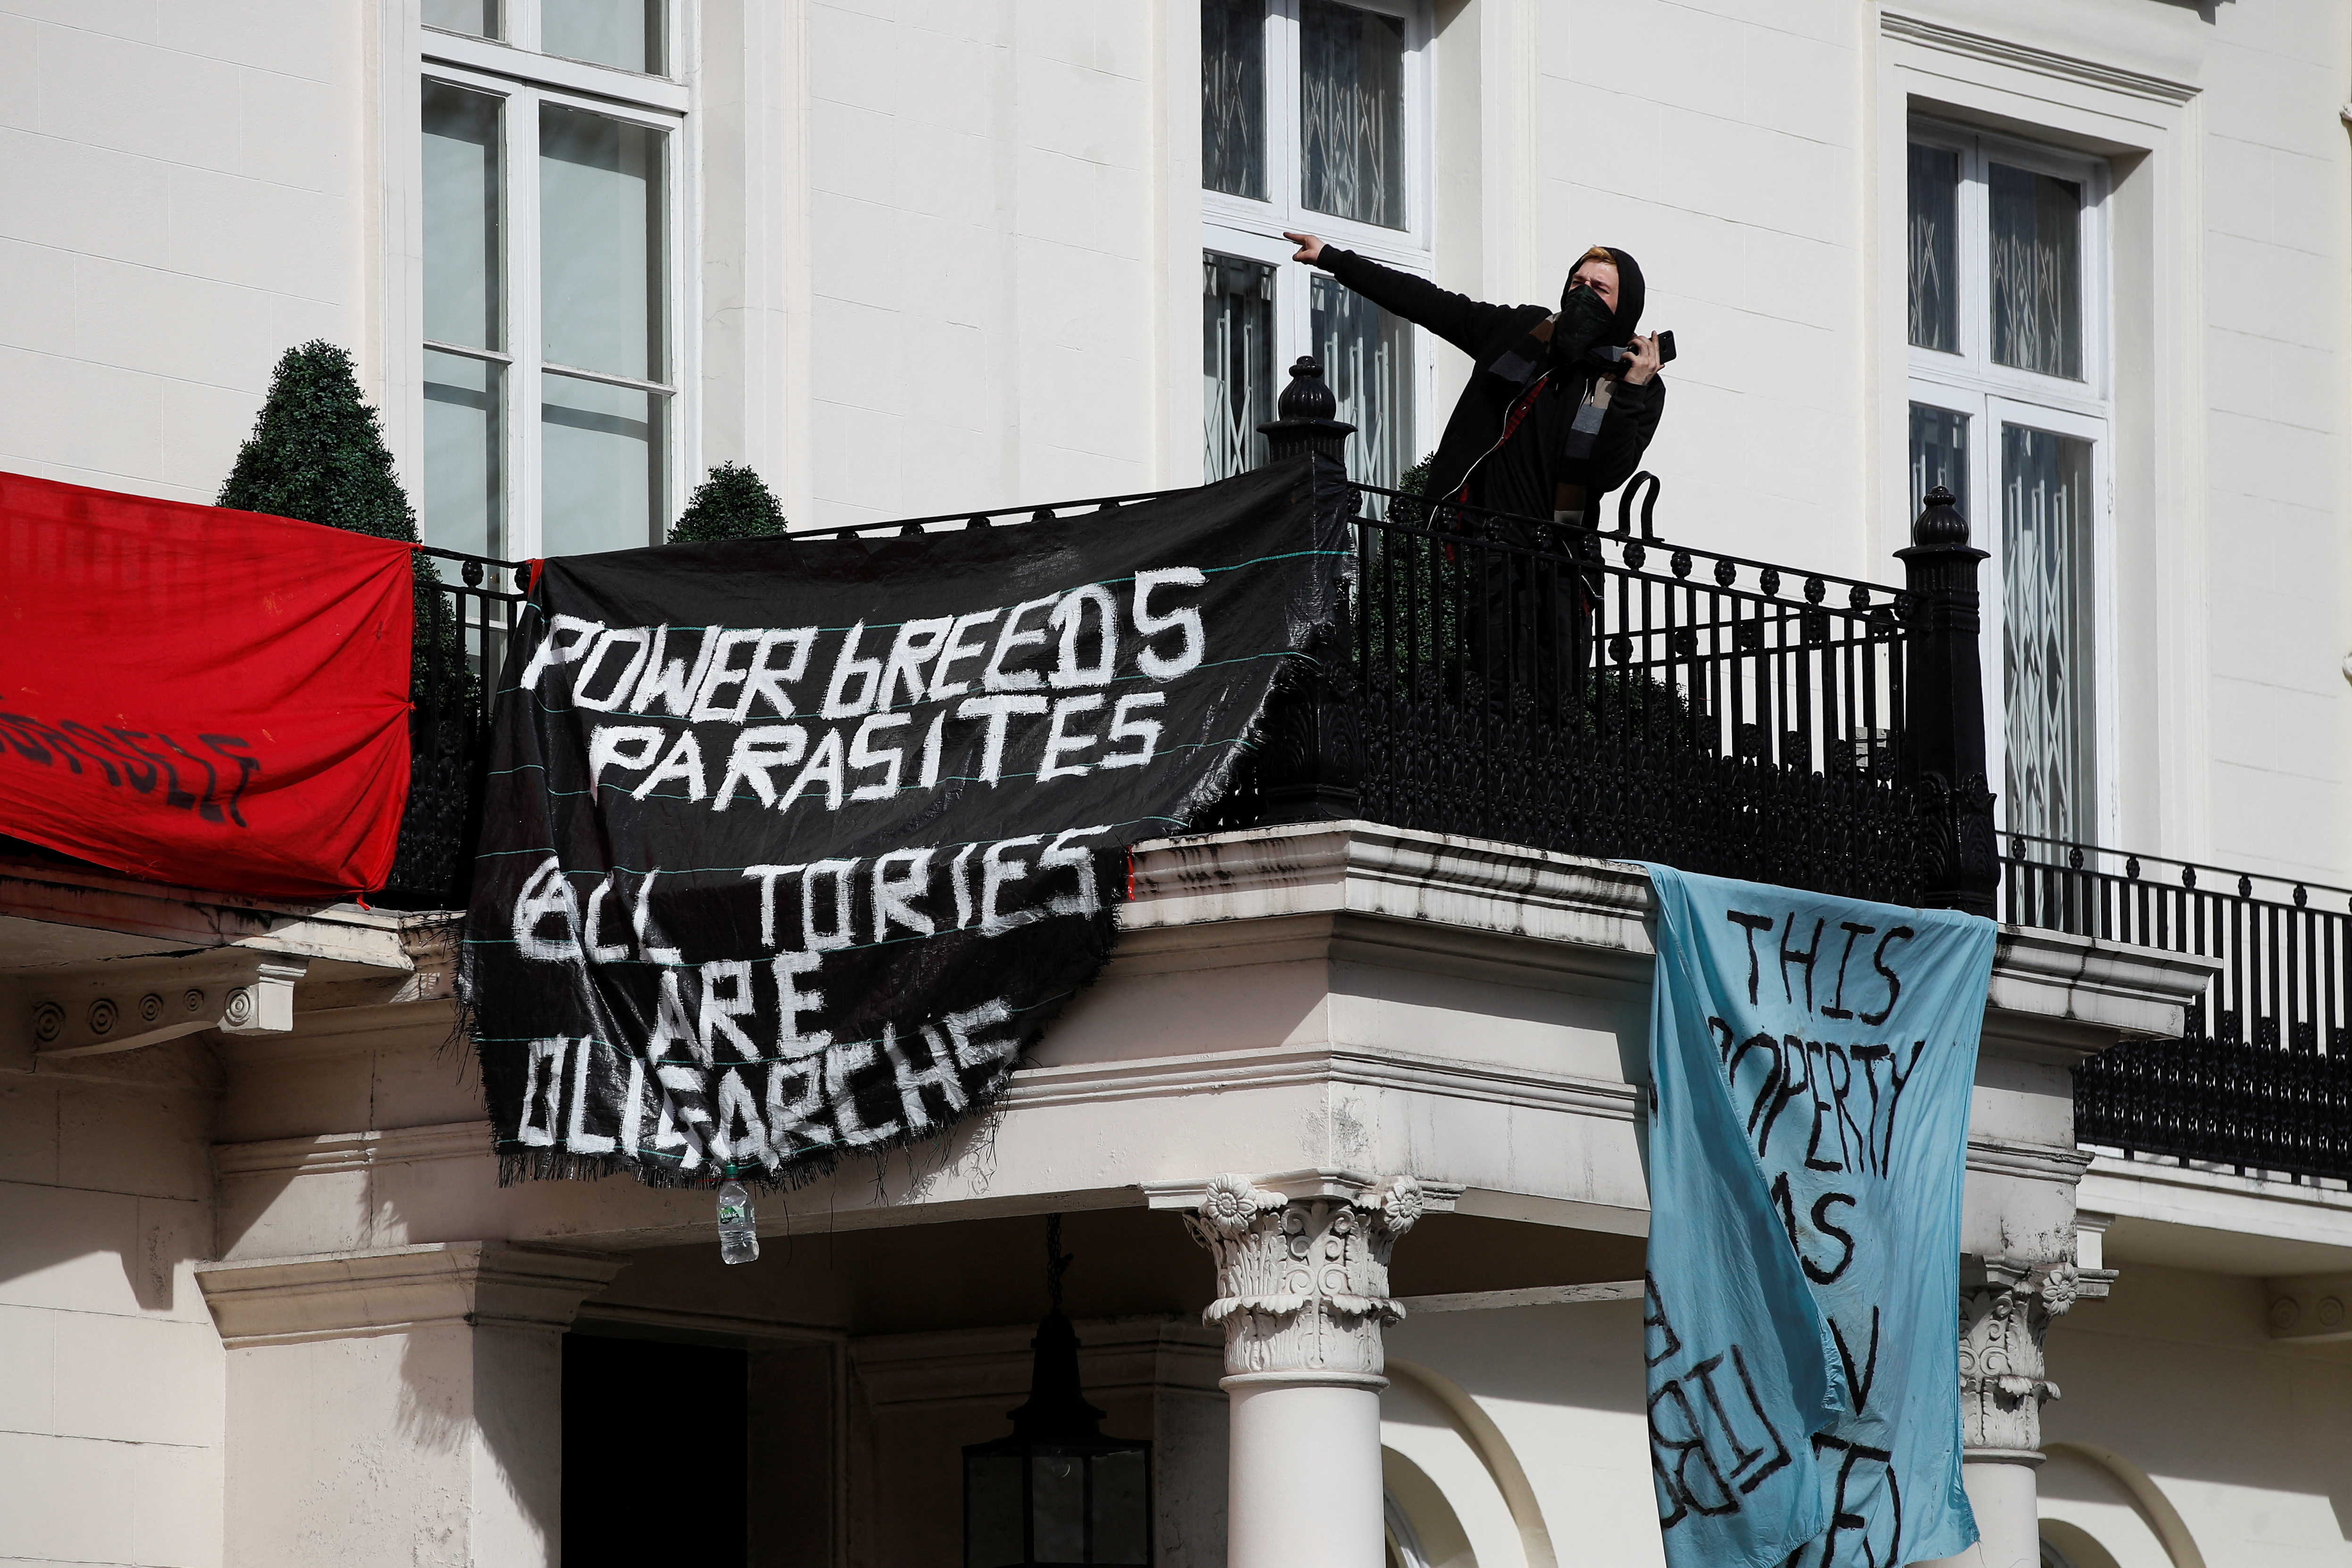 Squatters occupy mansion reportedly belonging to Russian Oligarch, in London